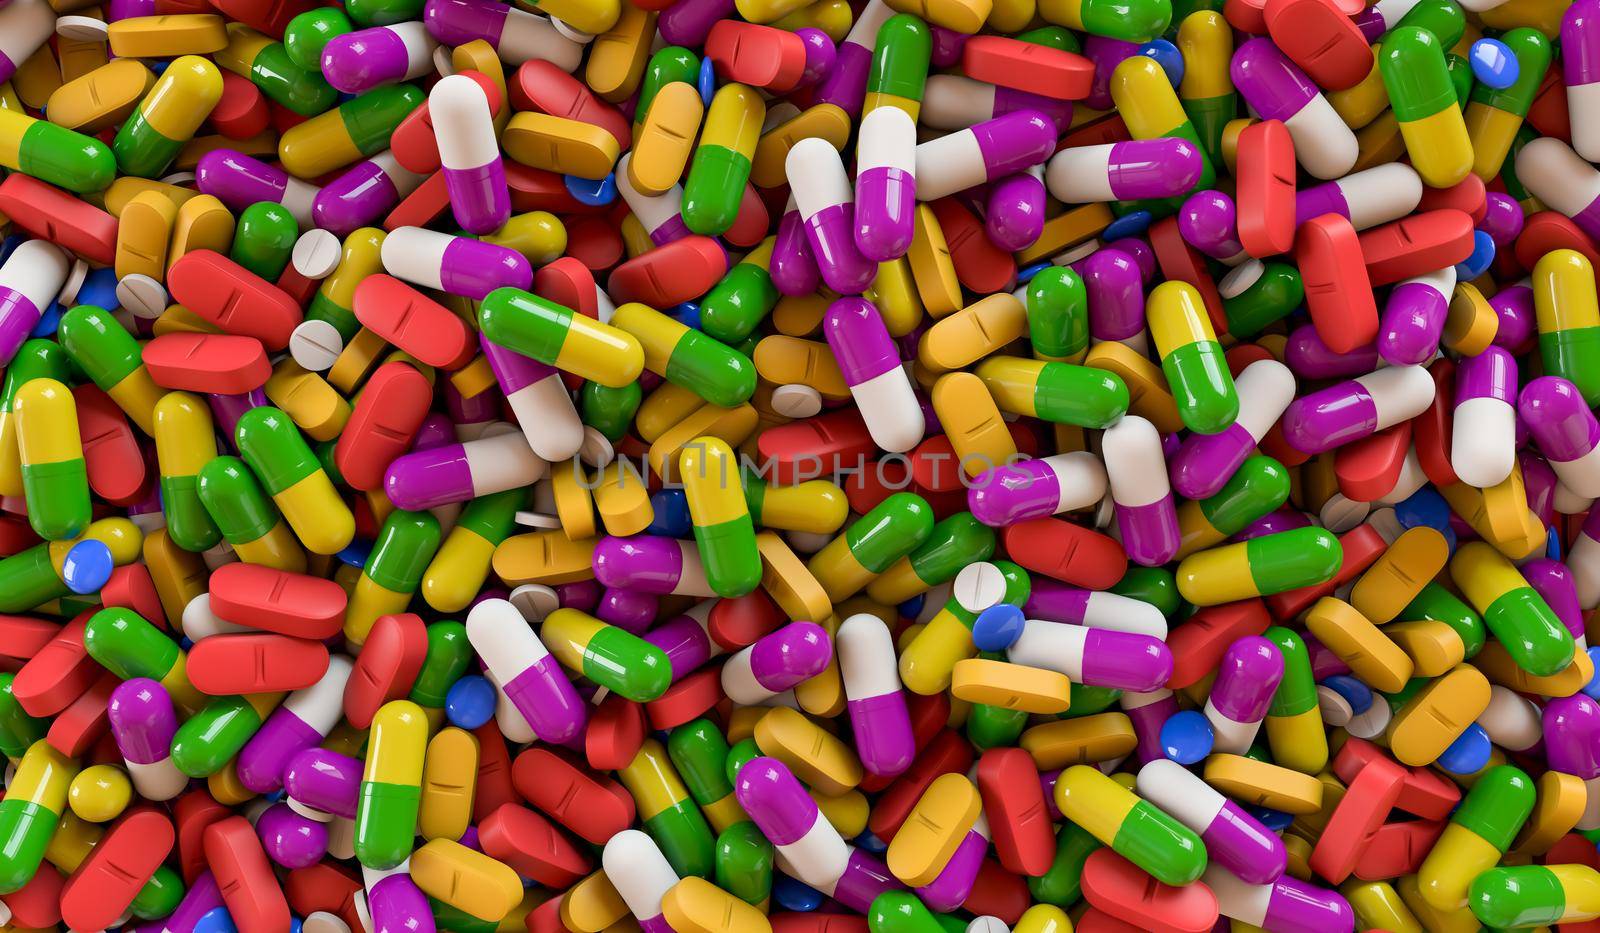 A lot colorful medication and pills from above